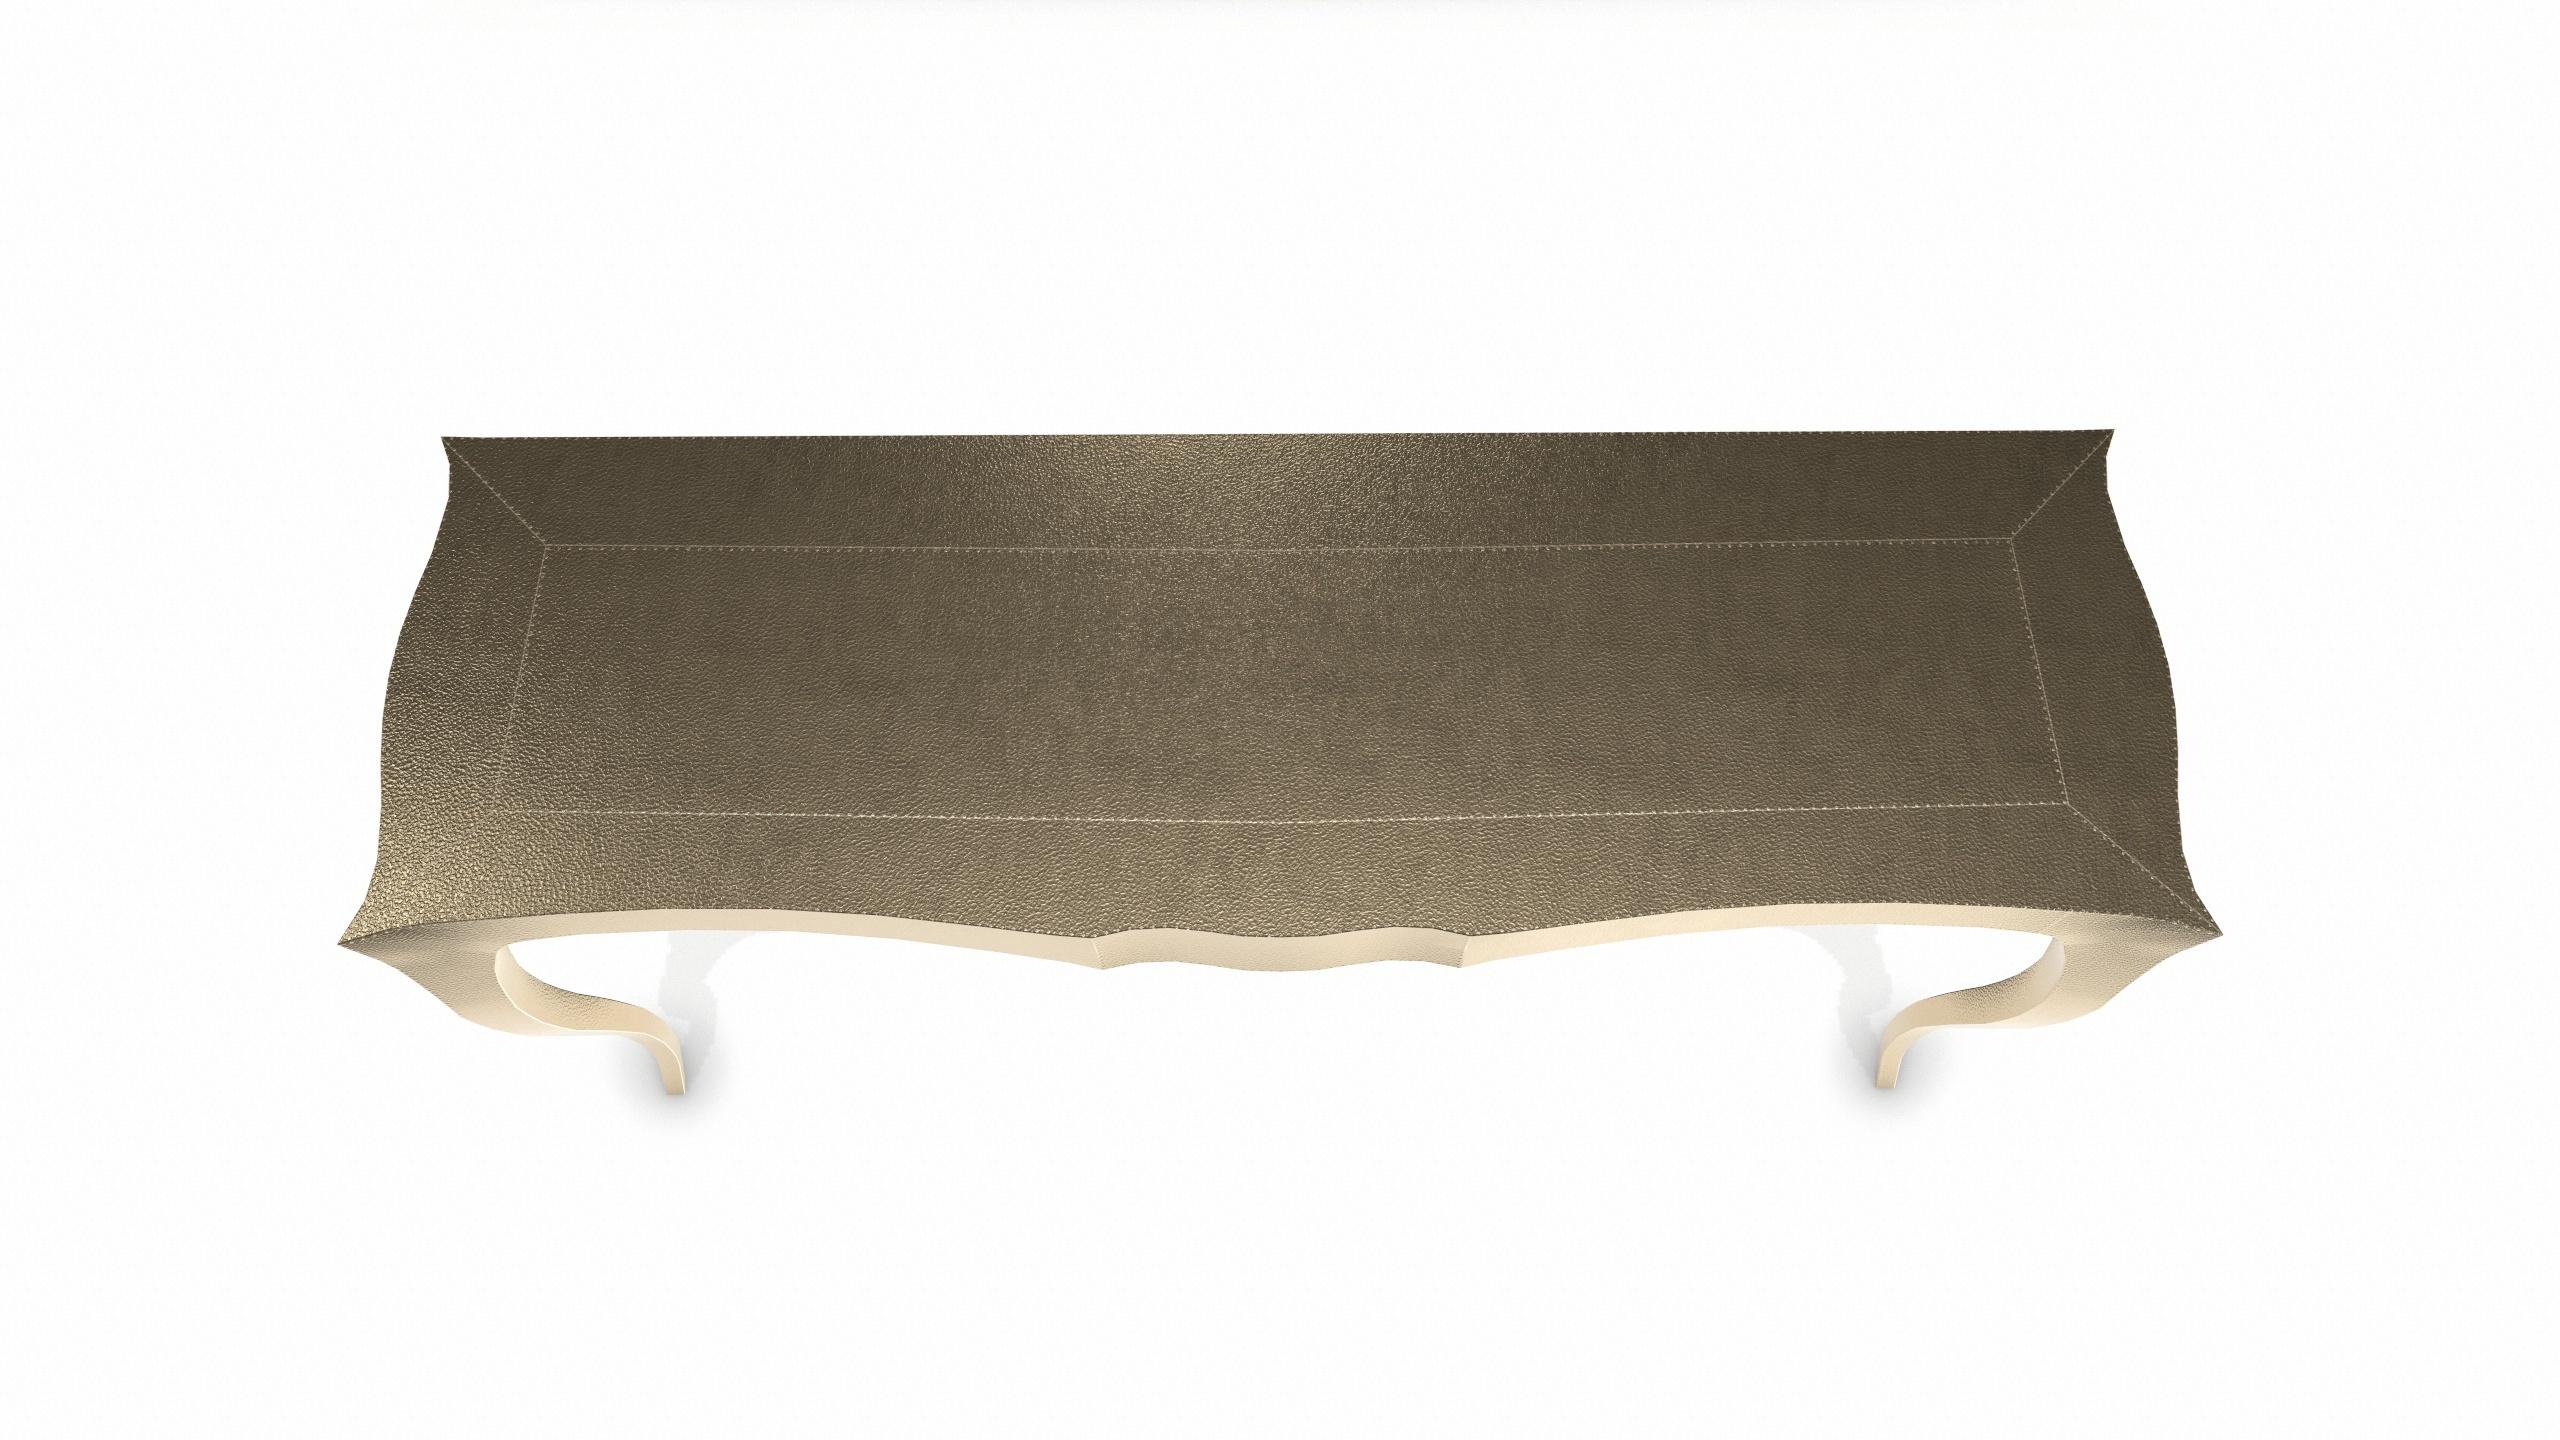 Other Louise Console Art Deco Center Tables Fine Hammered Brass by Paul Mathieu For Sale